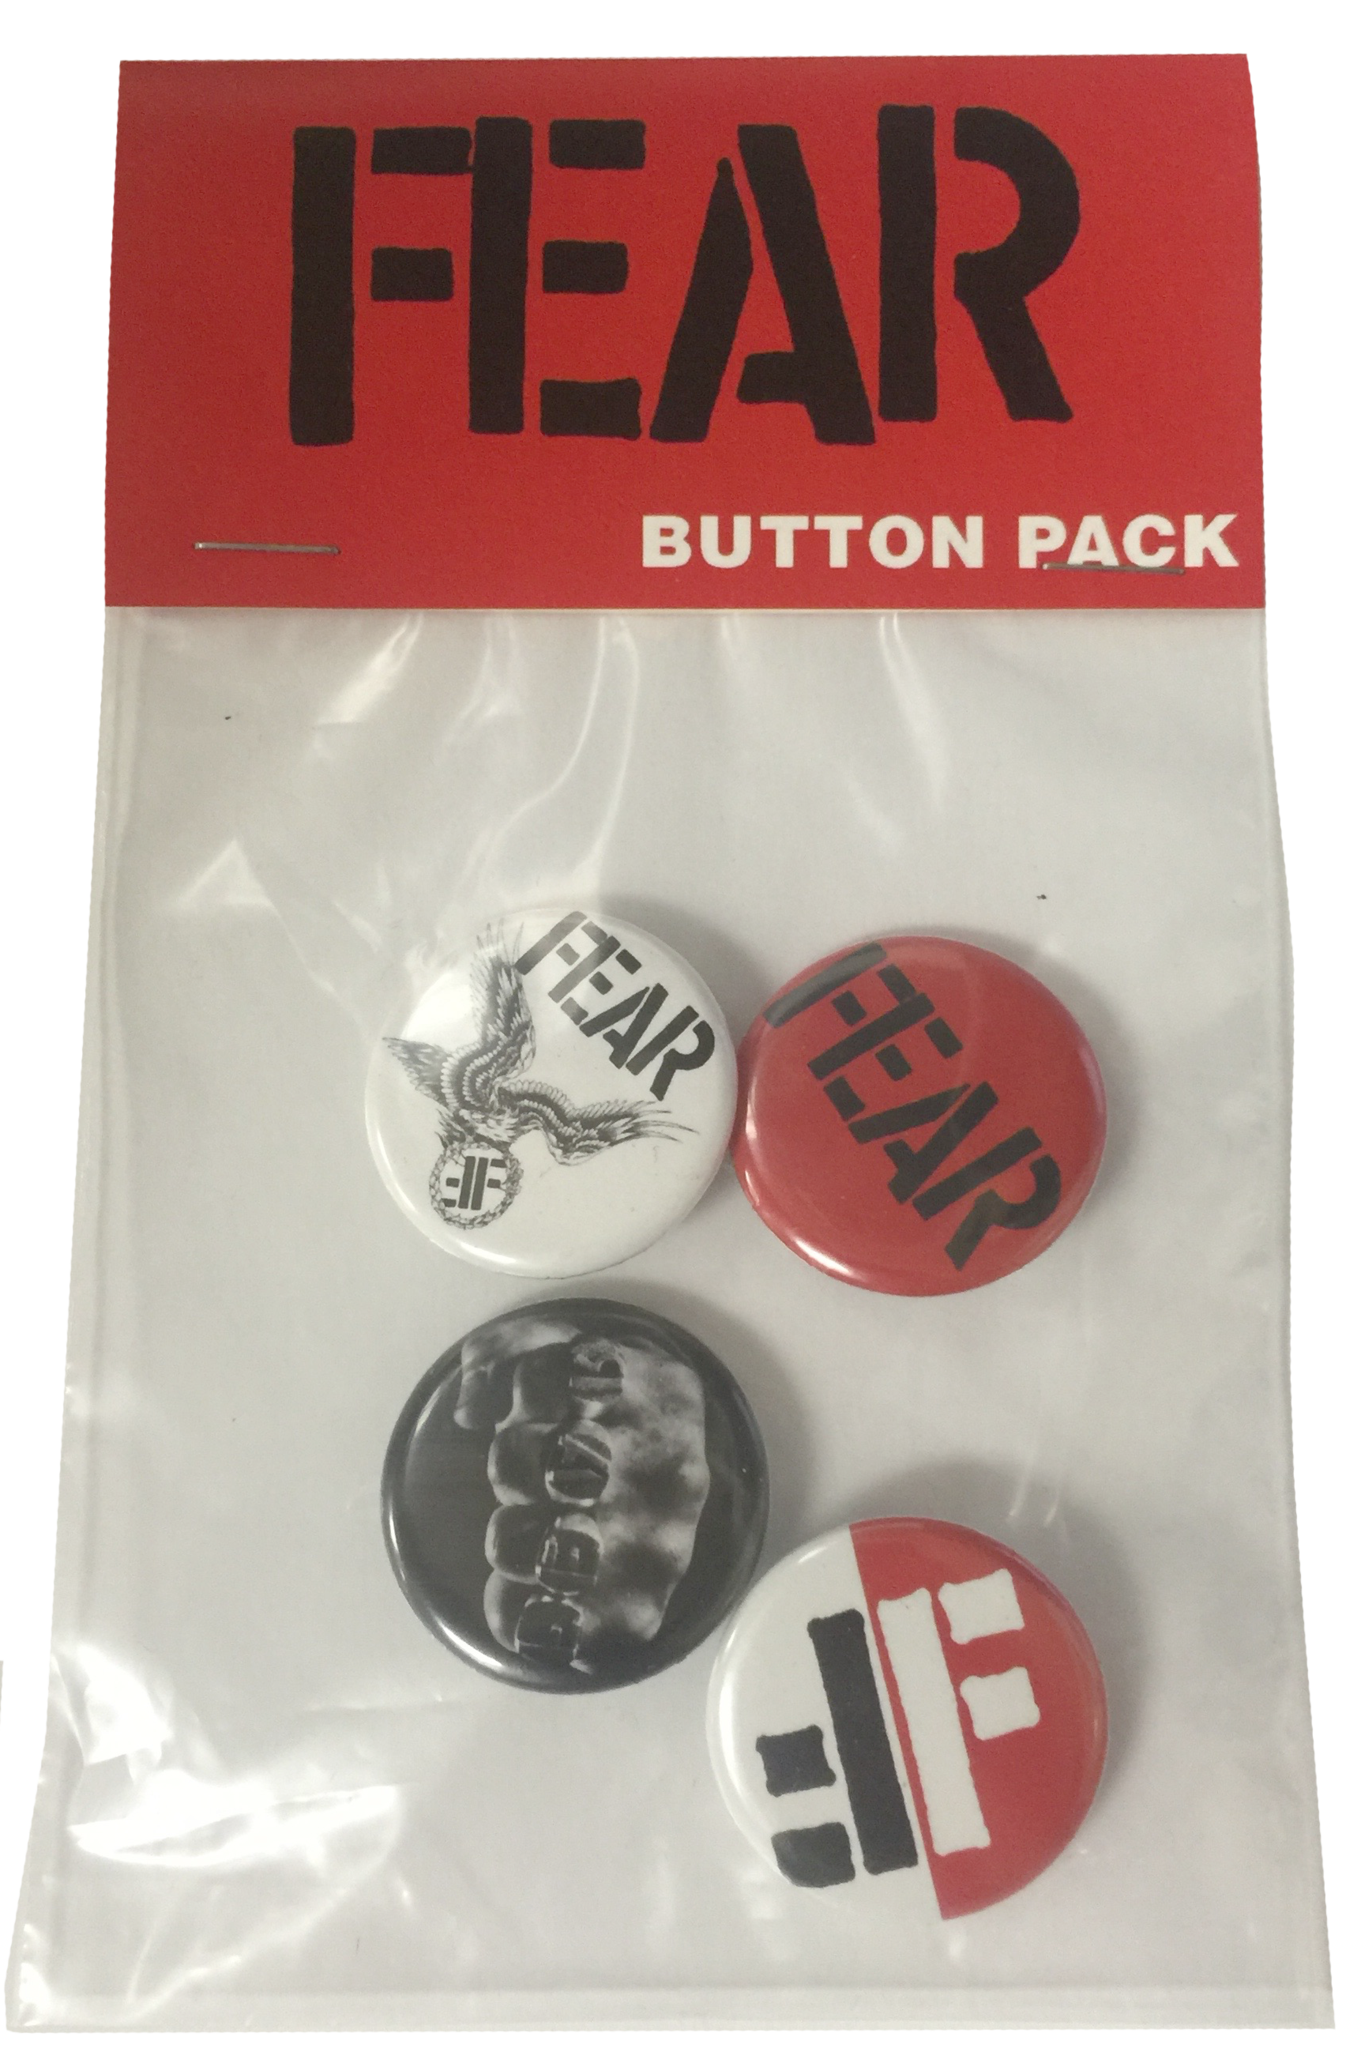 FEAR:  BUTTON PACK